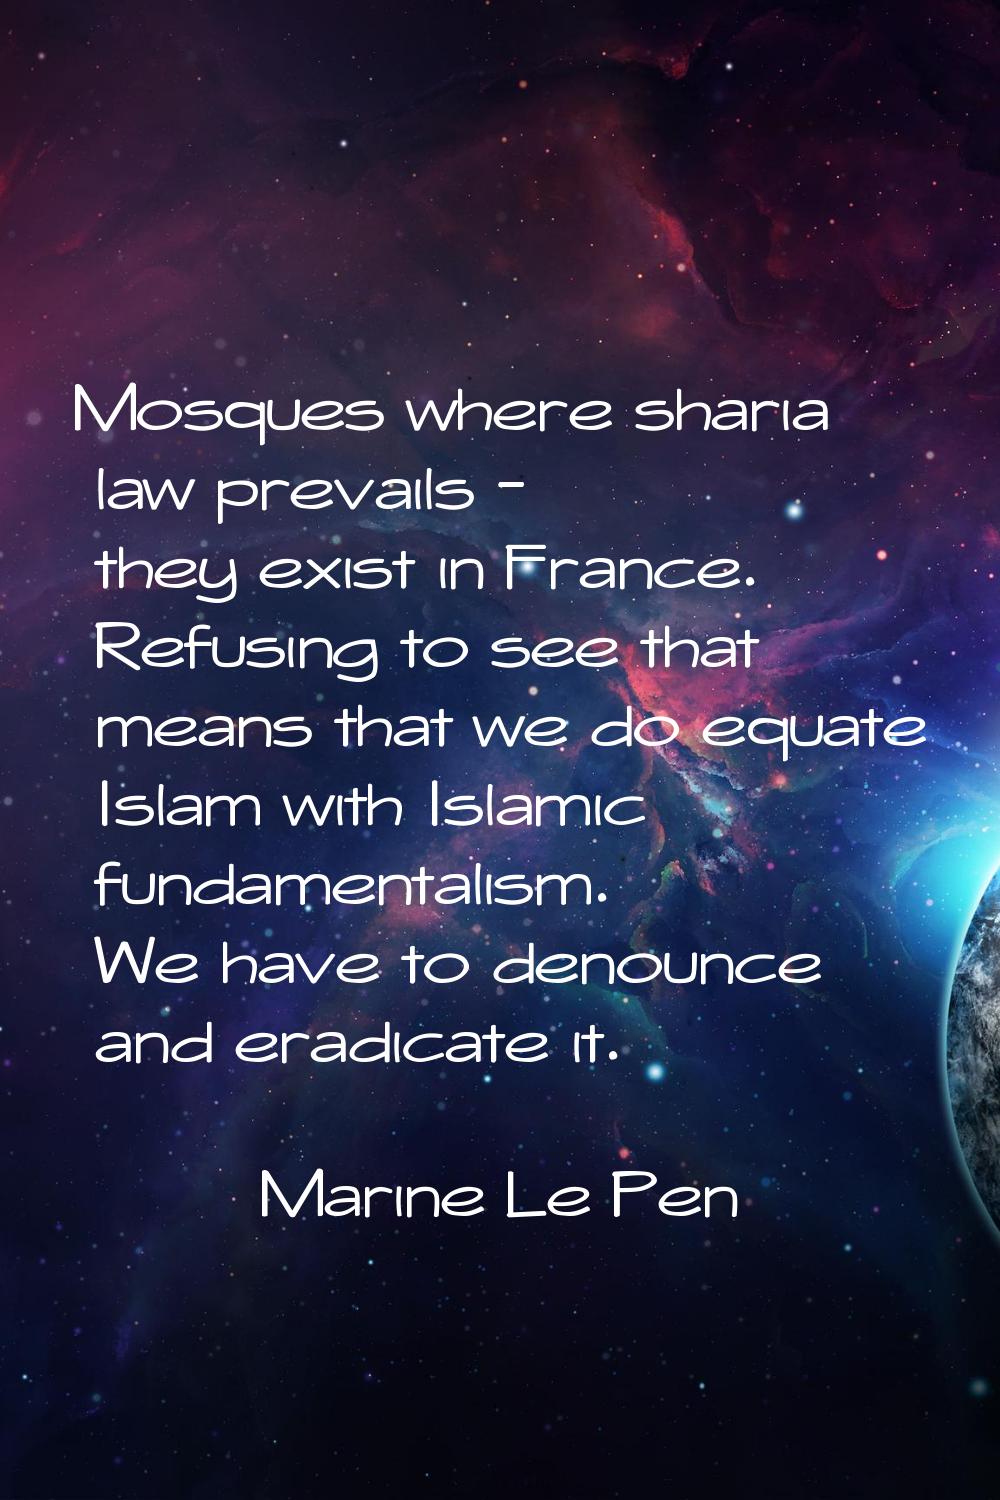 Mosques where sharia law prevails - they exist in France. Refusing to see that means that we do equ